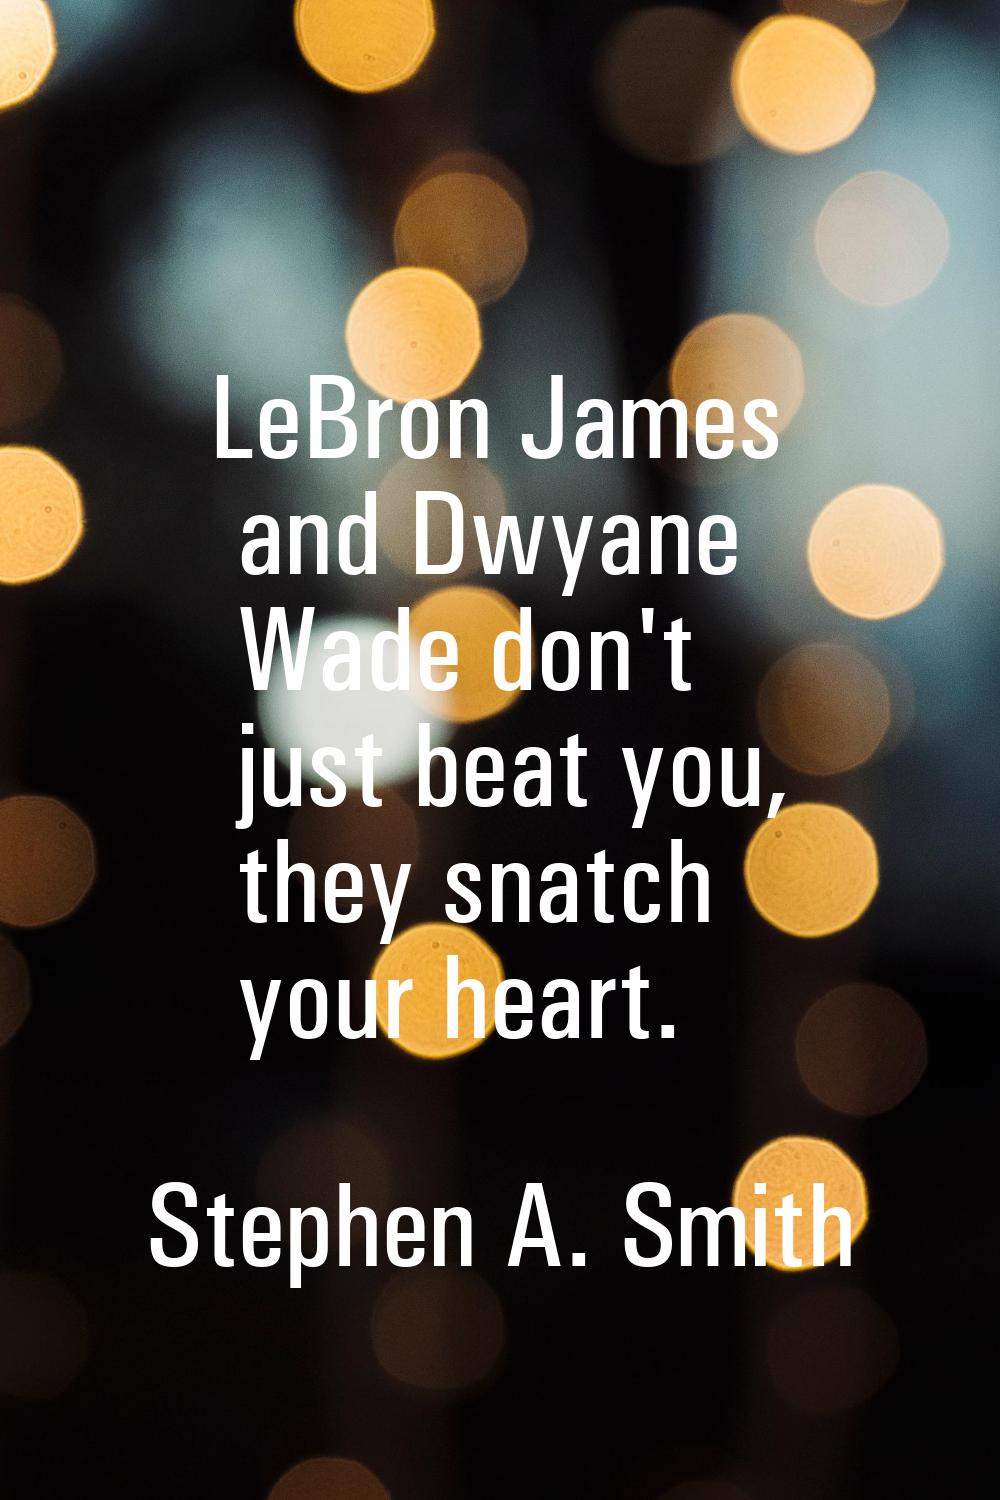 LeBron James and Dwyane Wade don't just beat you, they snatch your heart.